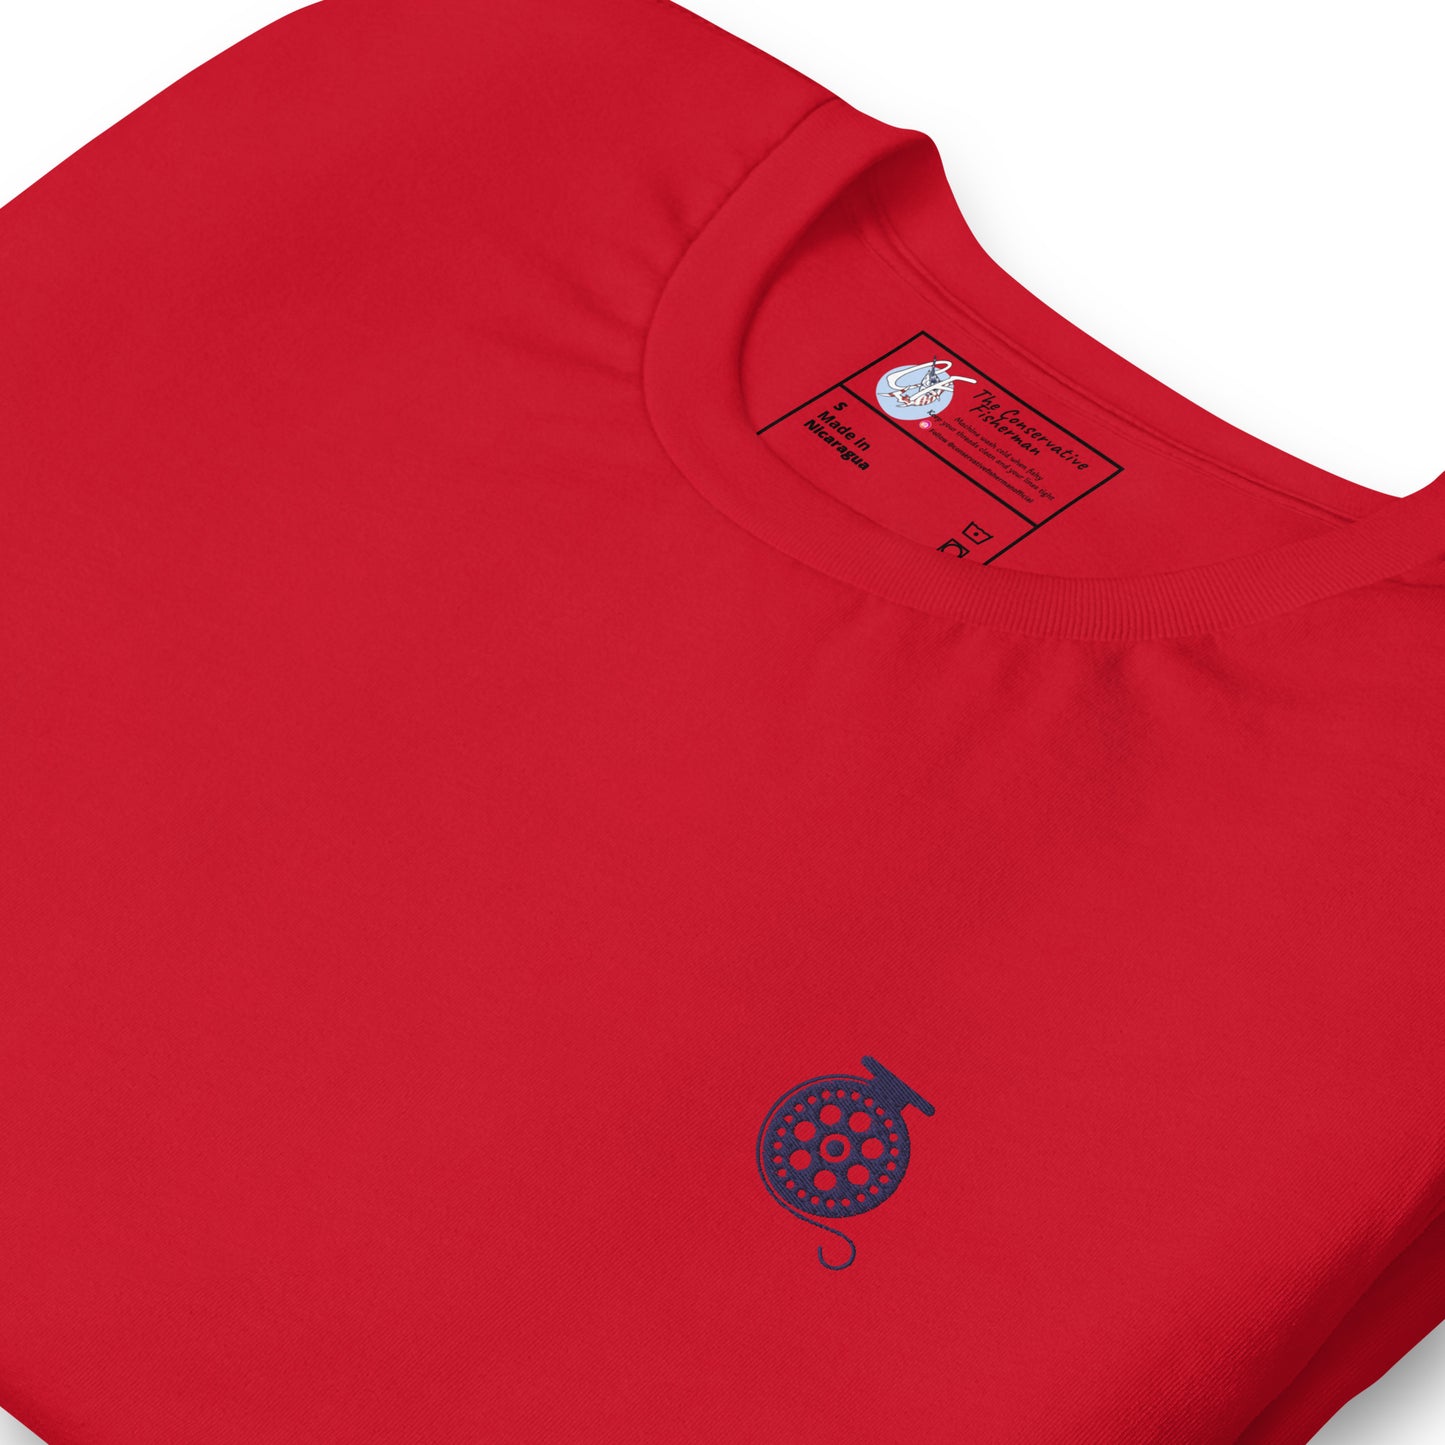 'Fly Fishing Reel' Premium Embroidered Shirt